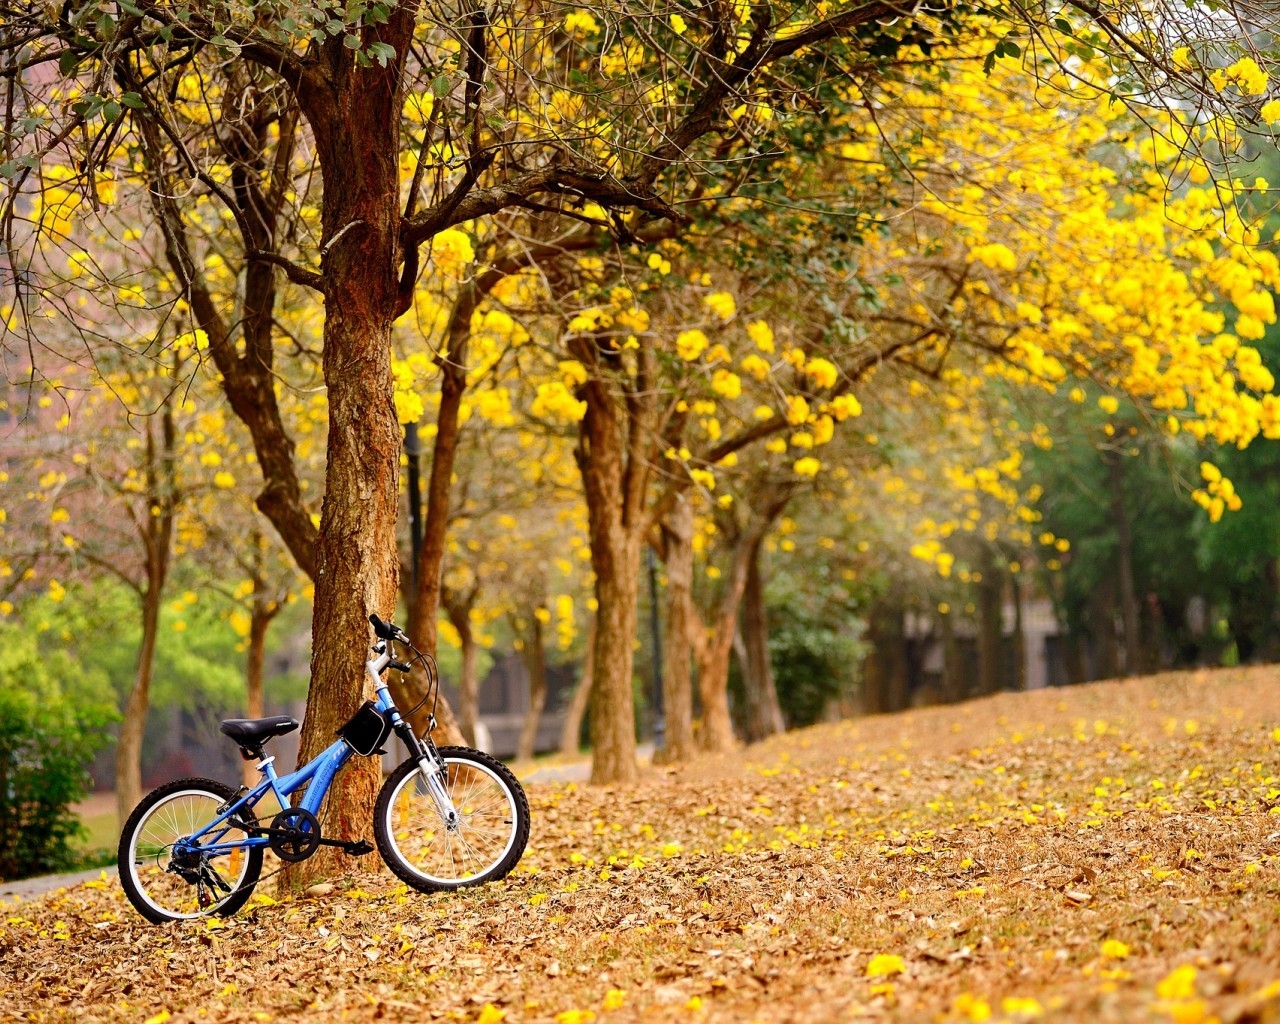 Bike in The Park for 1280 x 1024 resolution